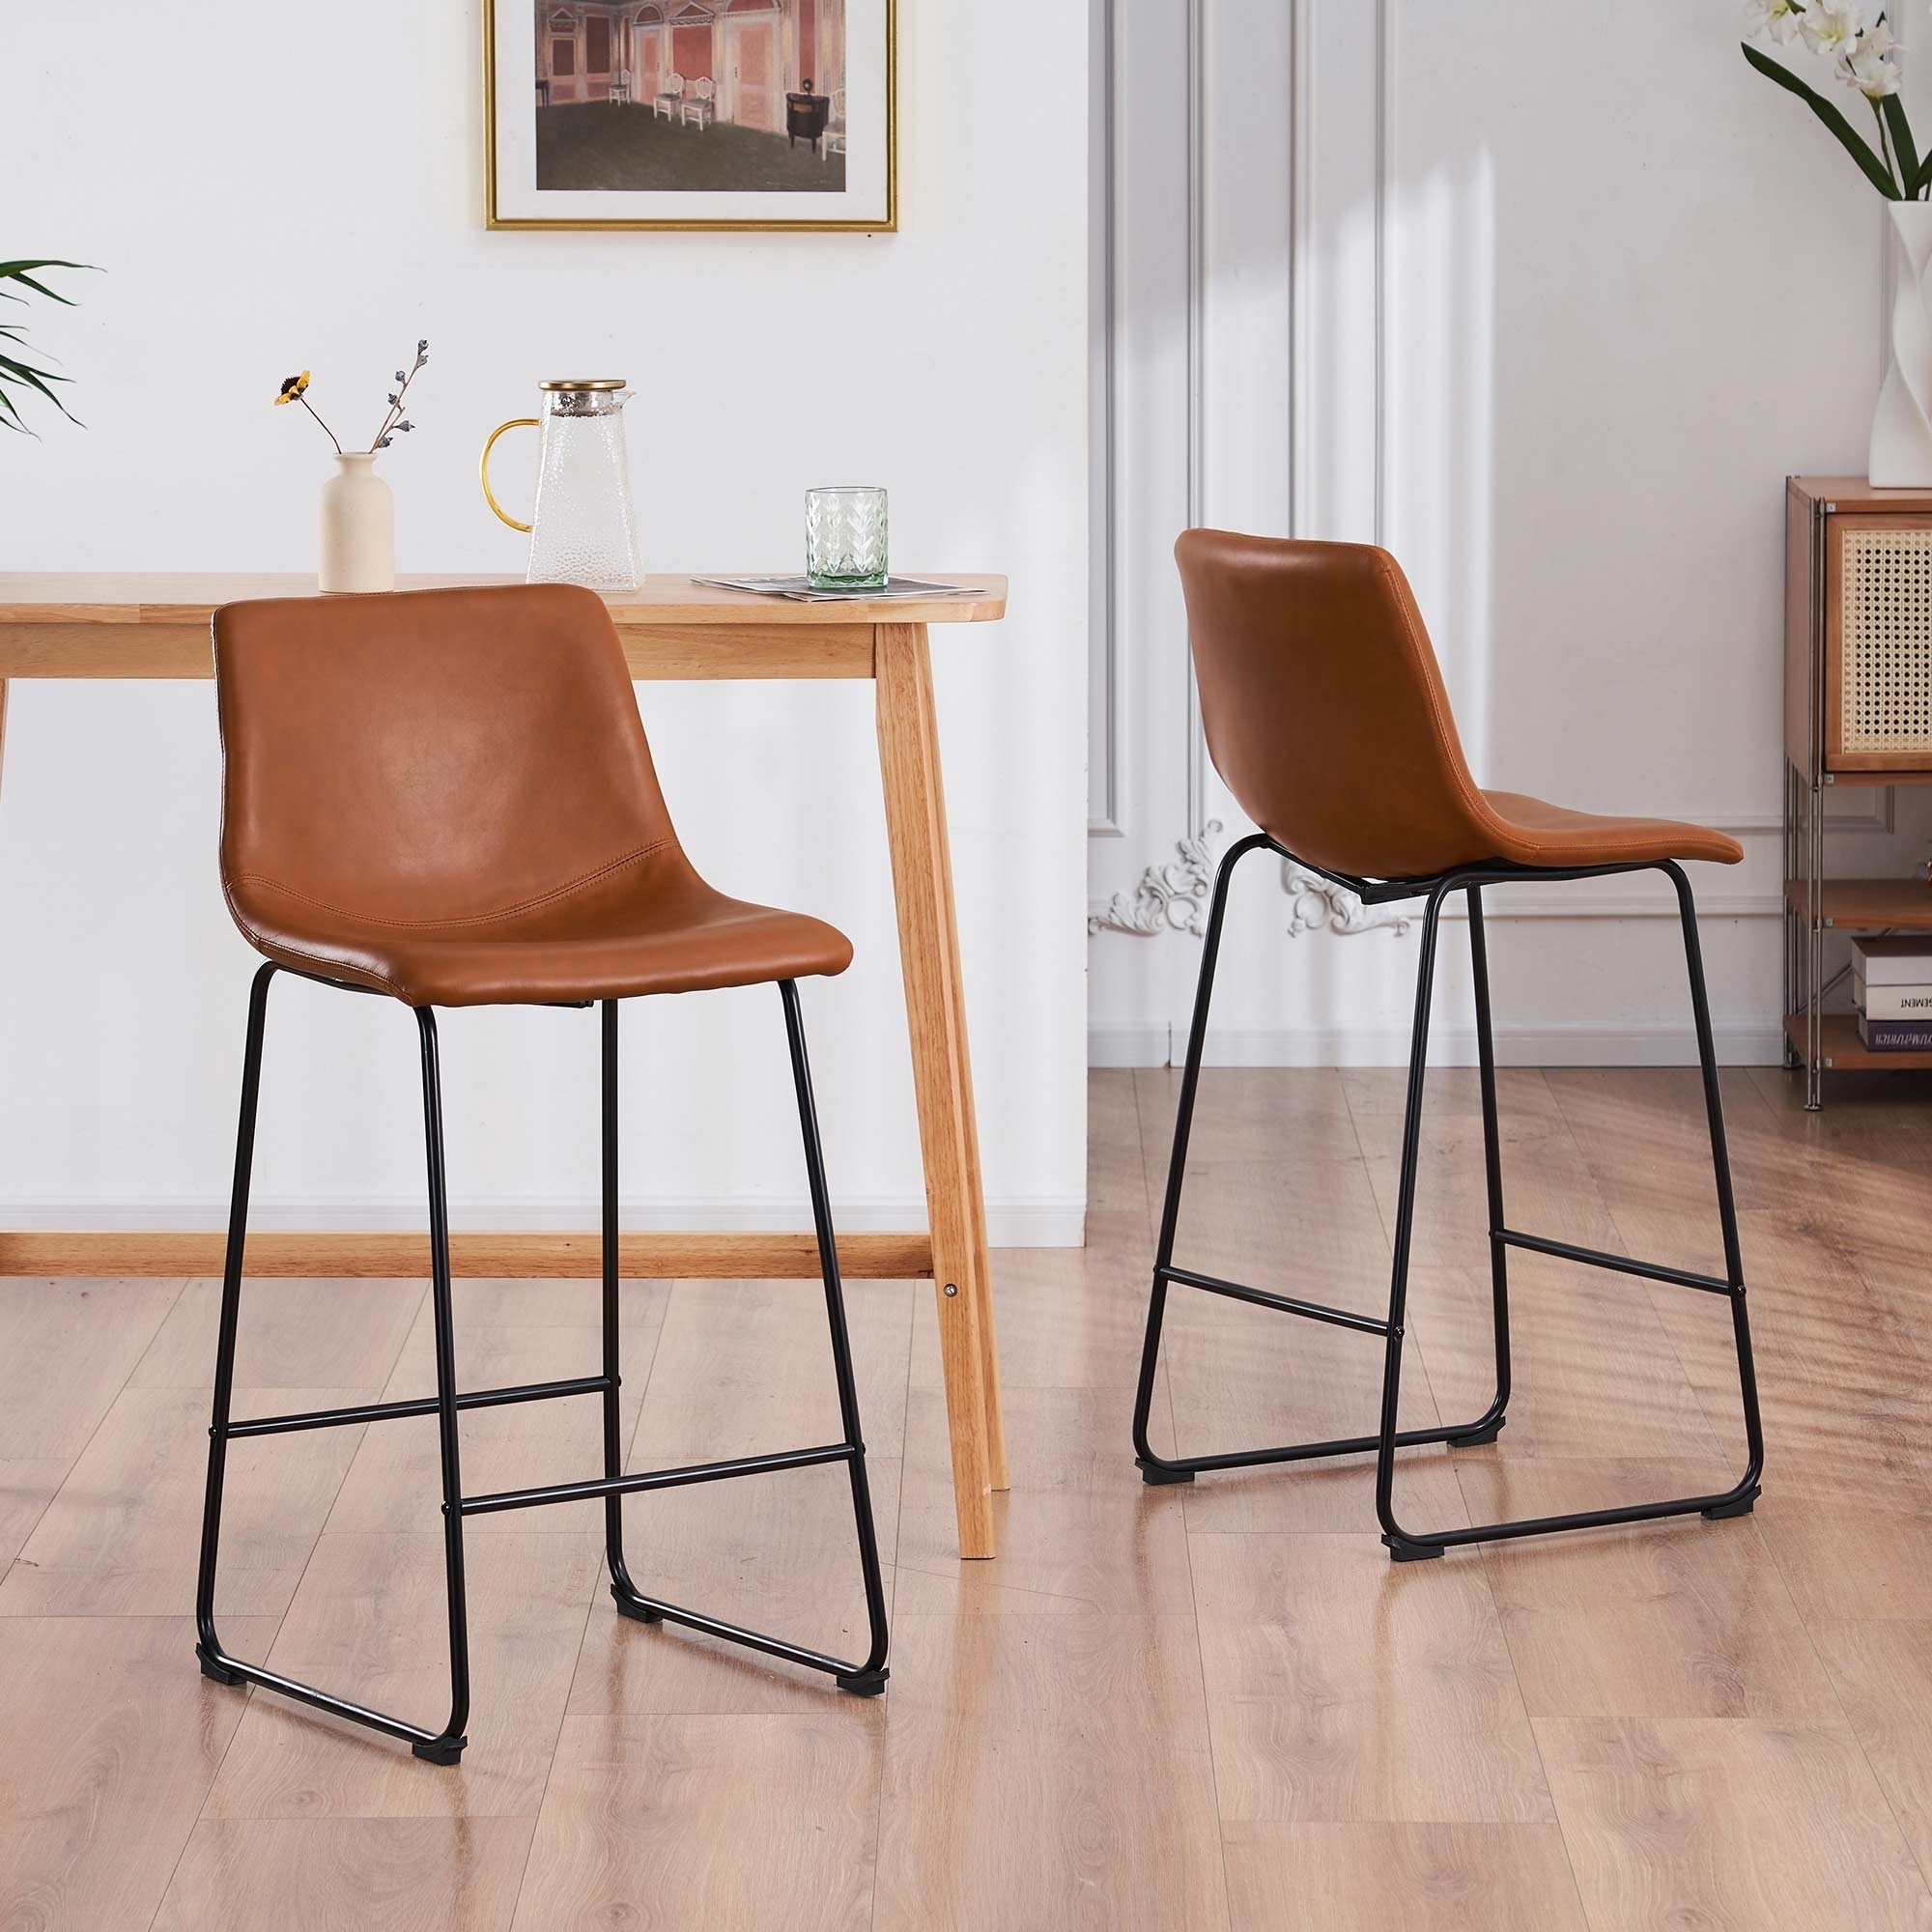 Set Of 2 Modern Upholstered Faux Leather Barstools - 26 Or 30 Counter Stool - Black, 26